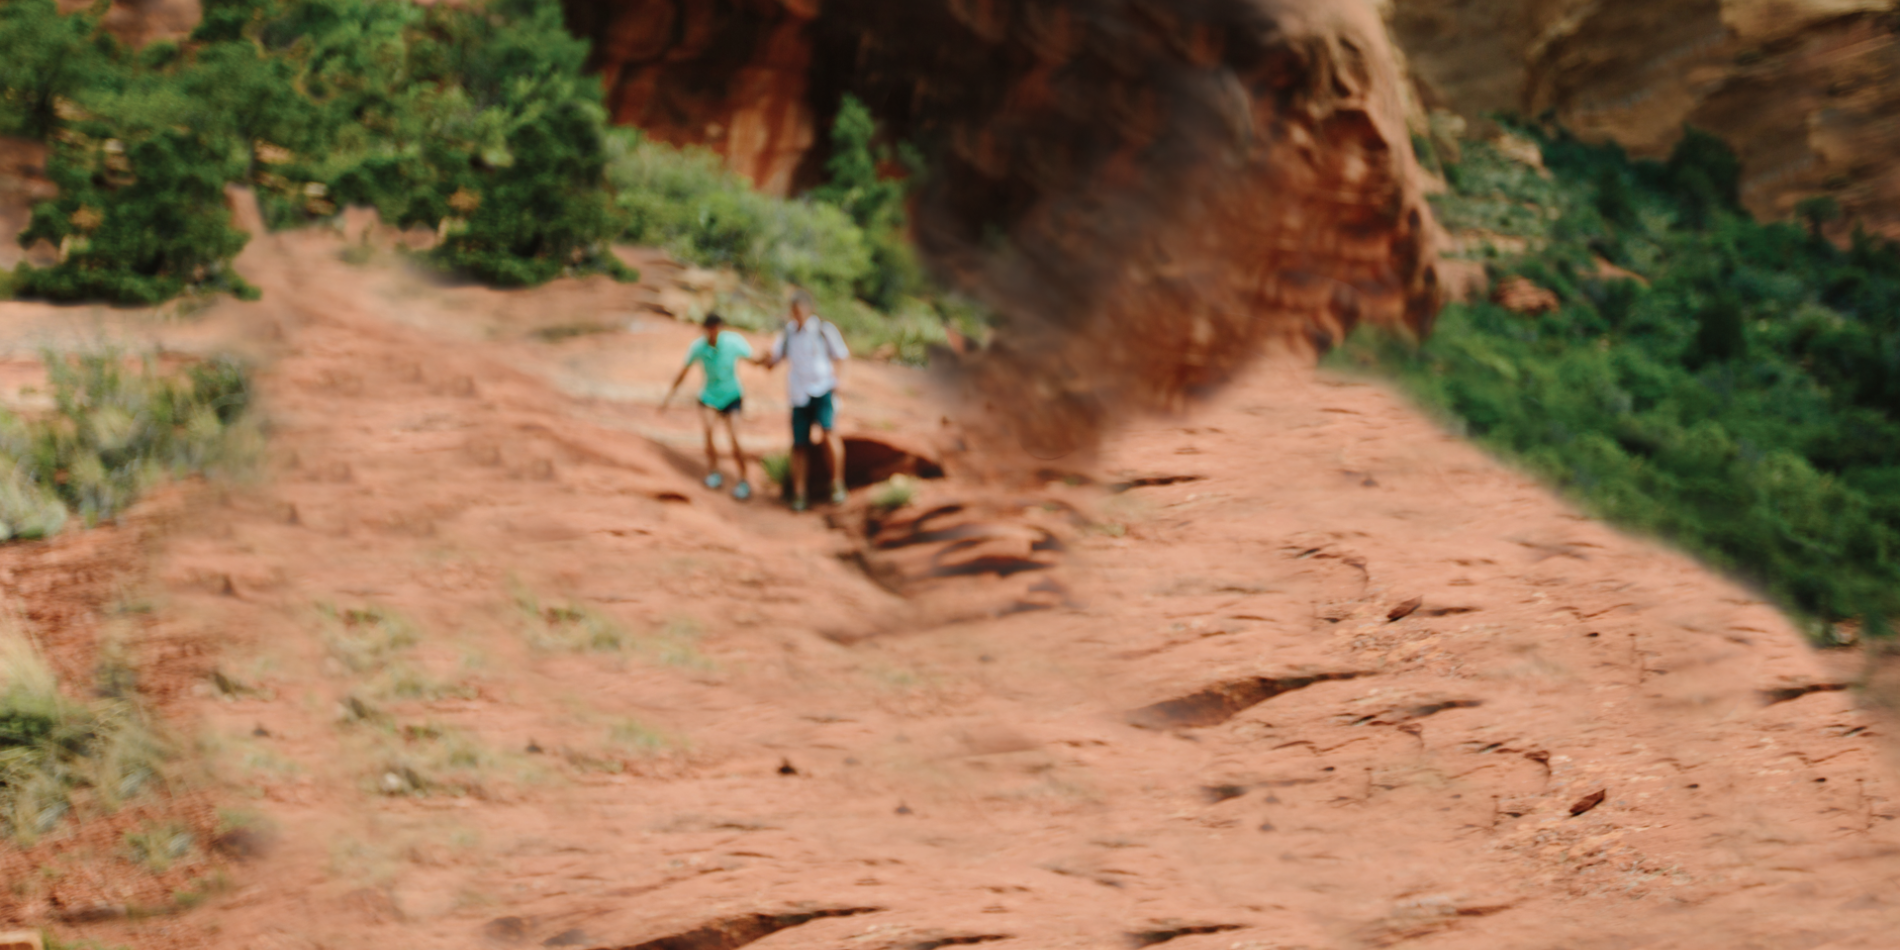 day trips in arizona for families